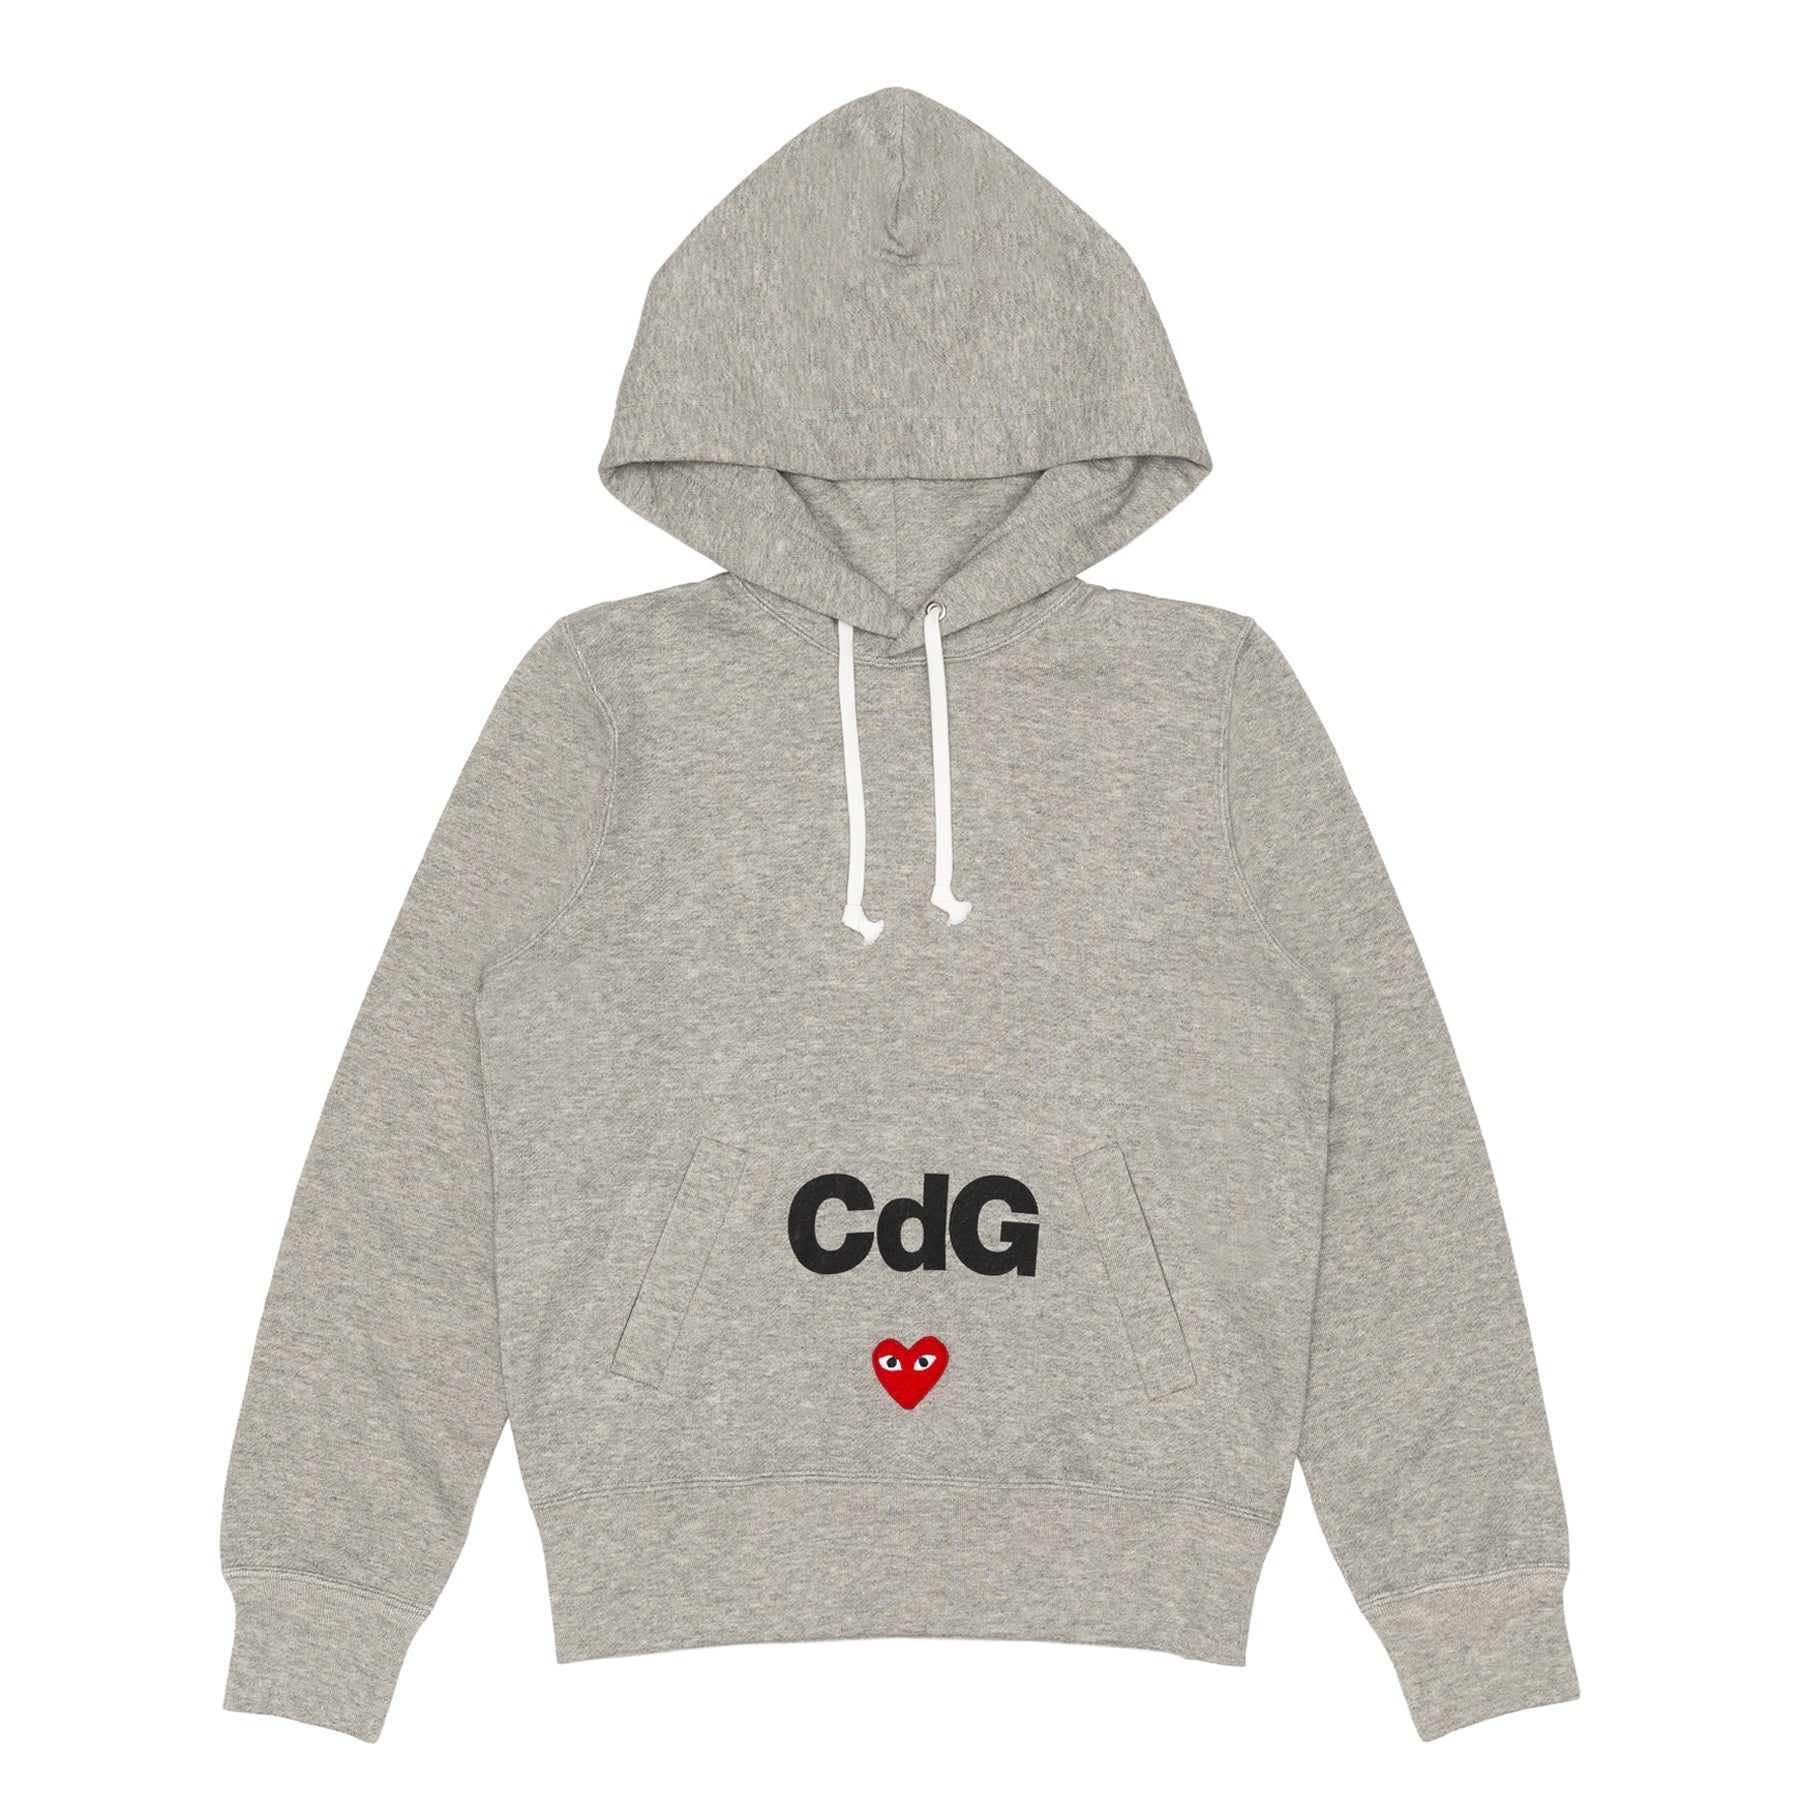 Cdg Play The North Face X Play Hoody M | www.150.illinois.edu